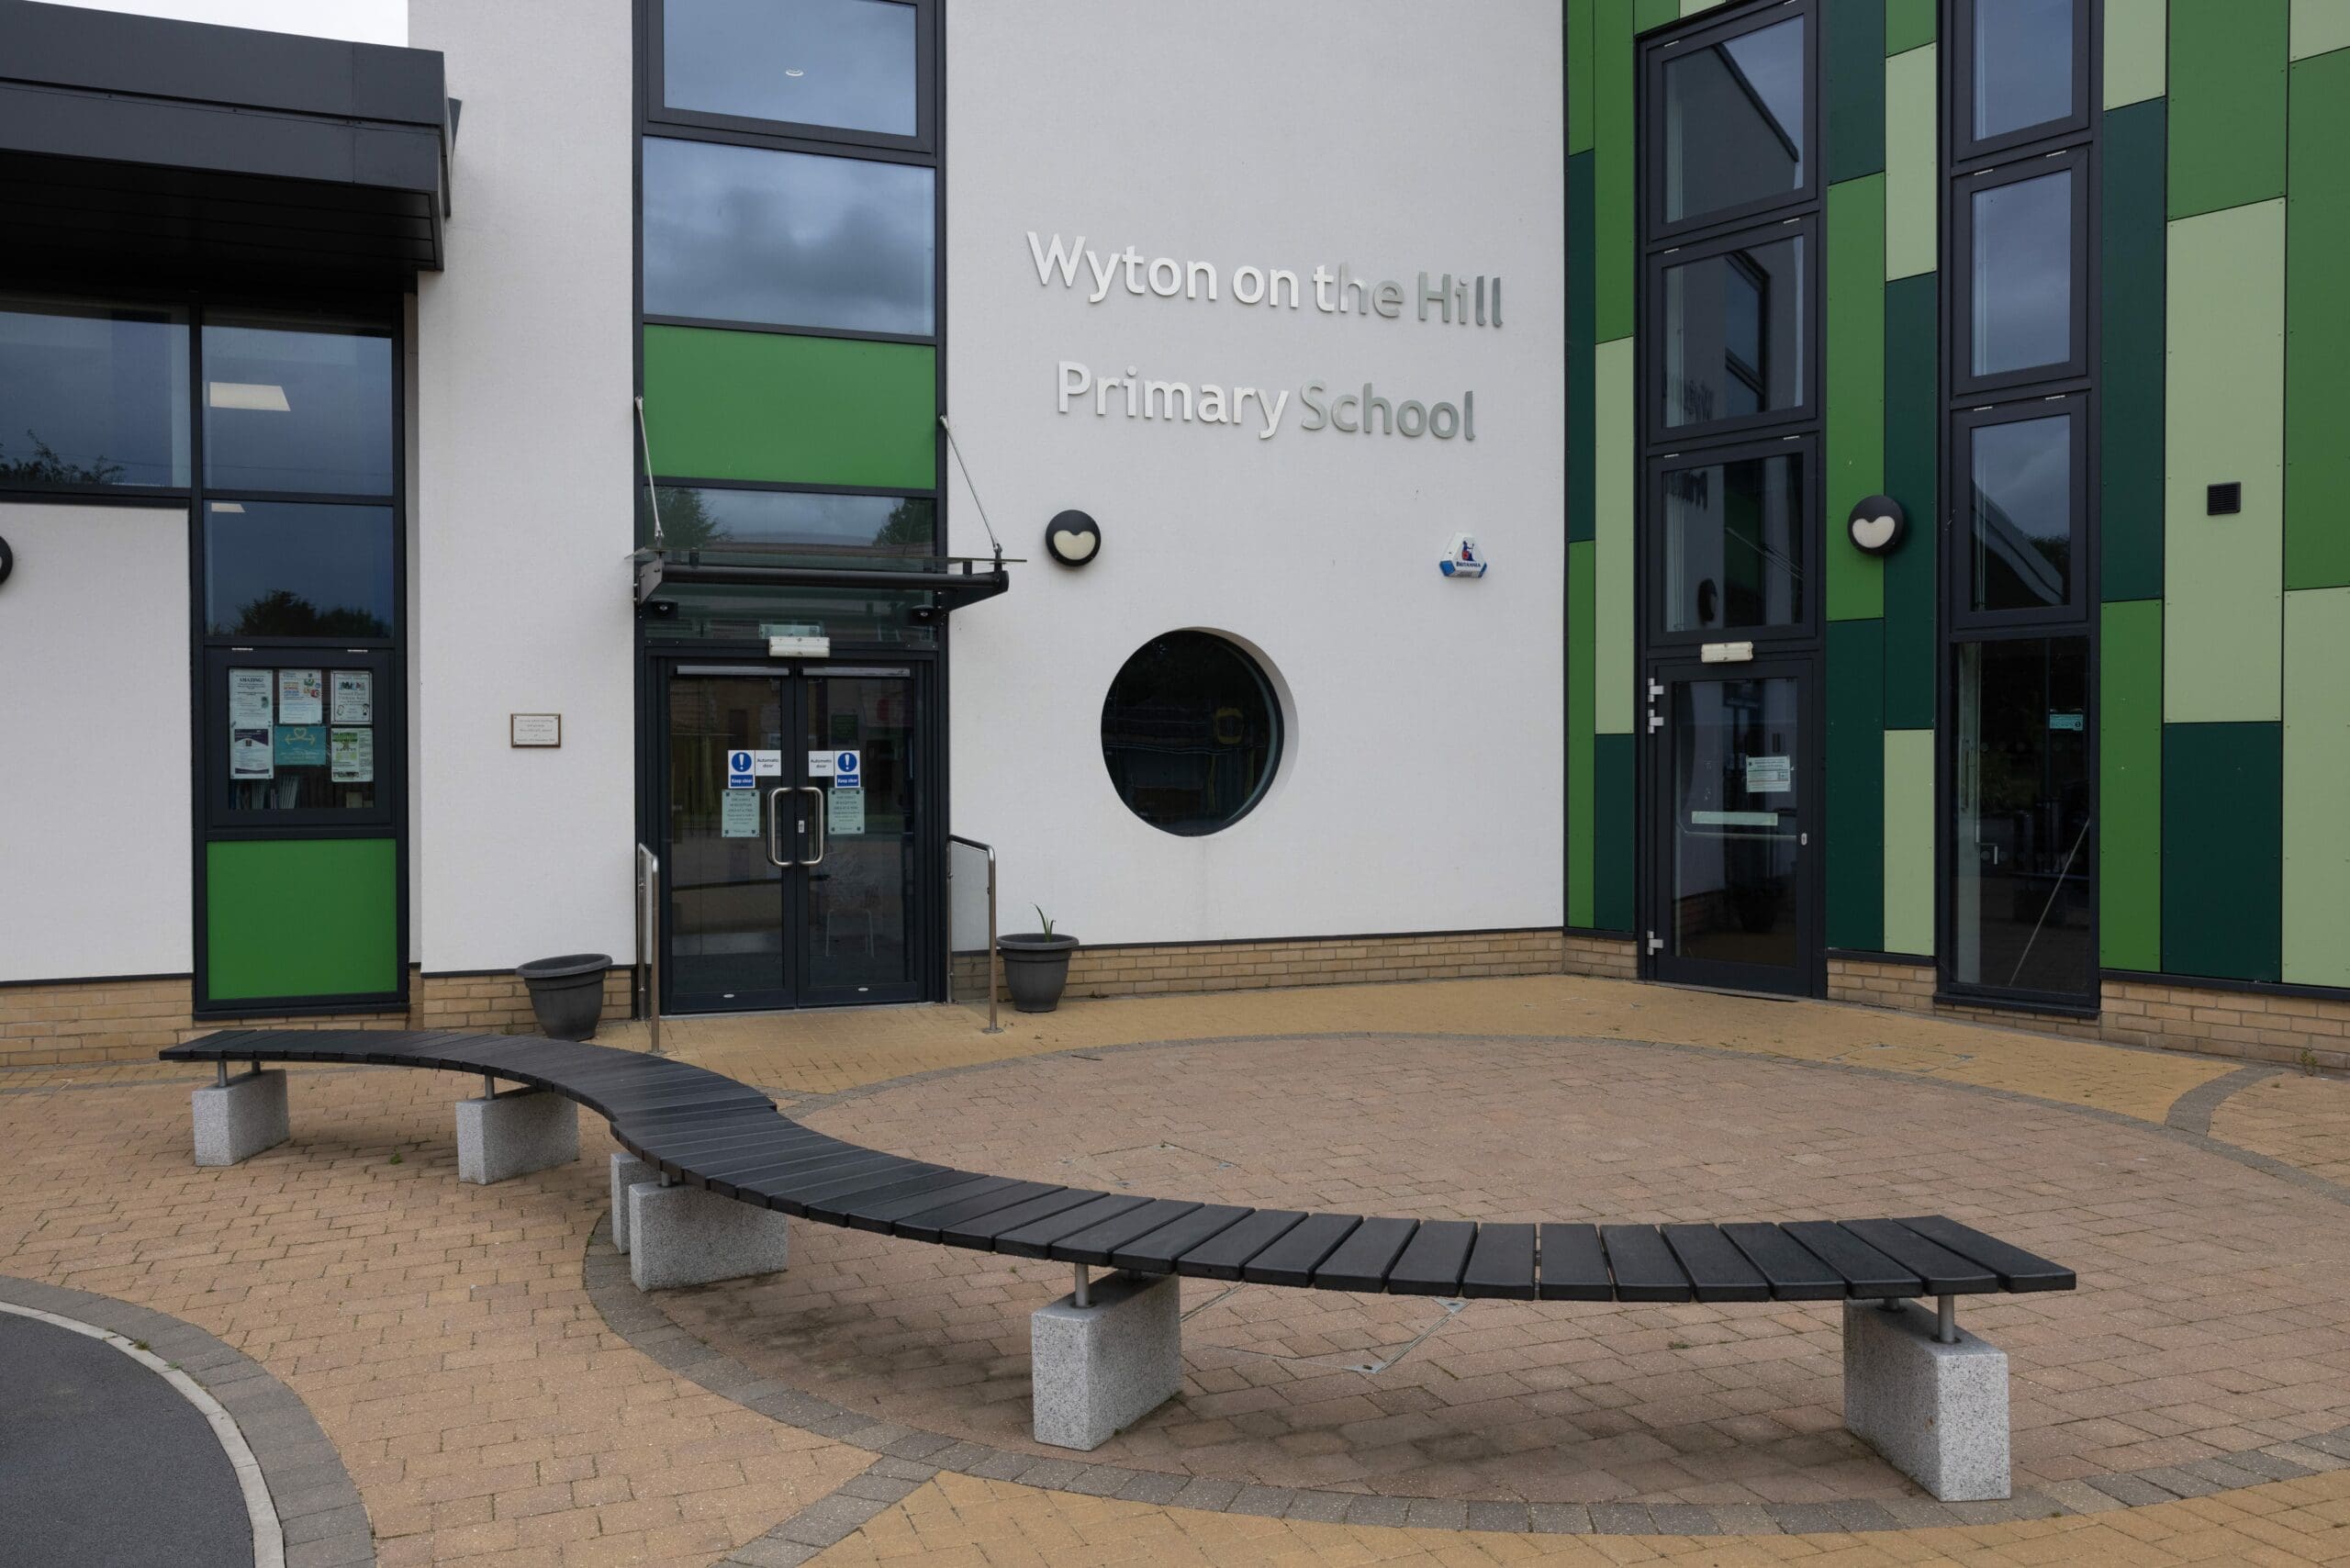 S shaped curved outdoor bench black wood concrete plinths infront of primary school building